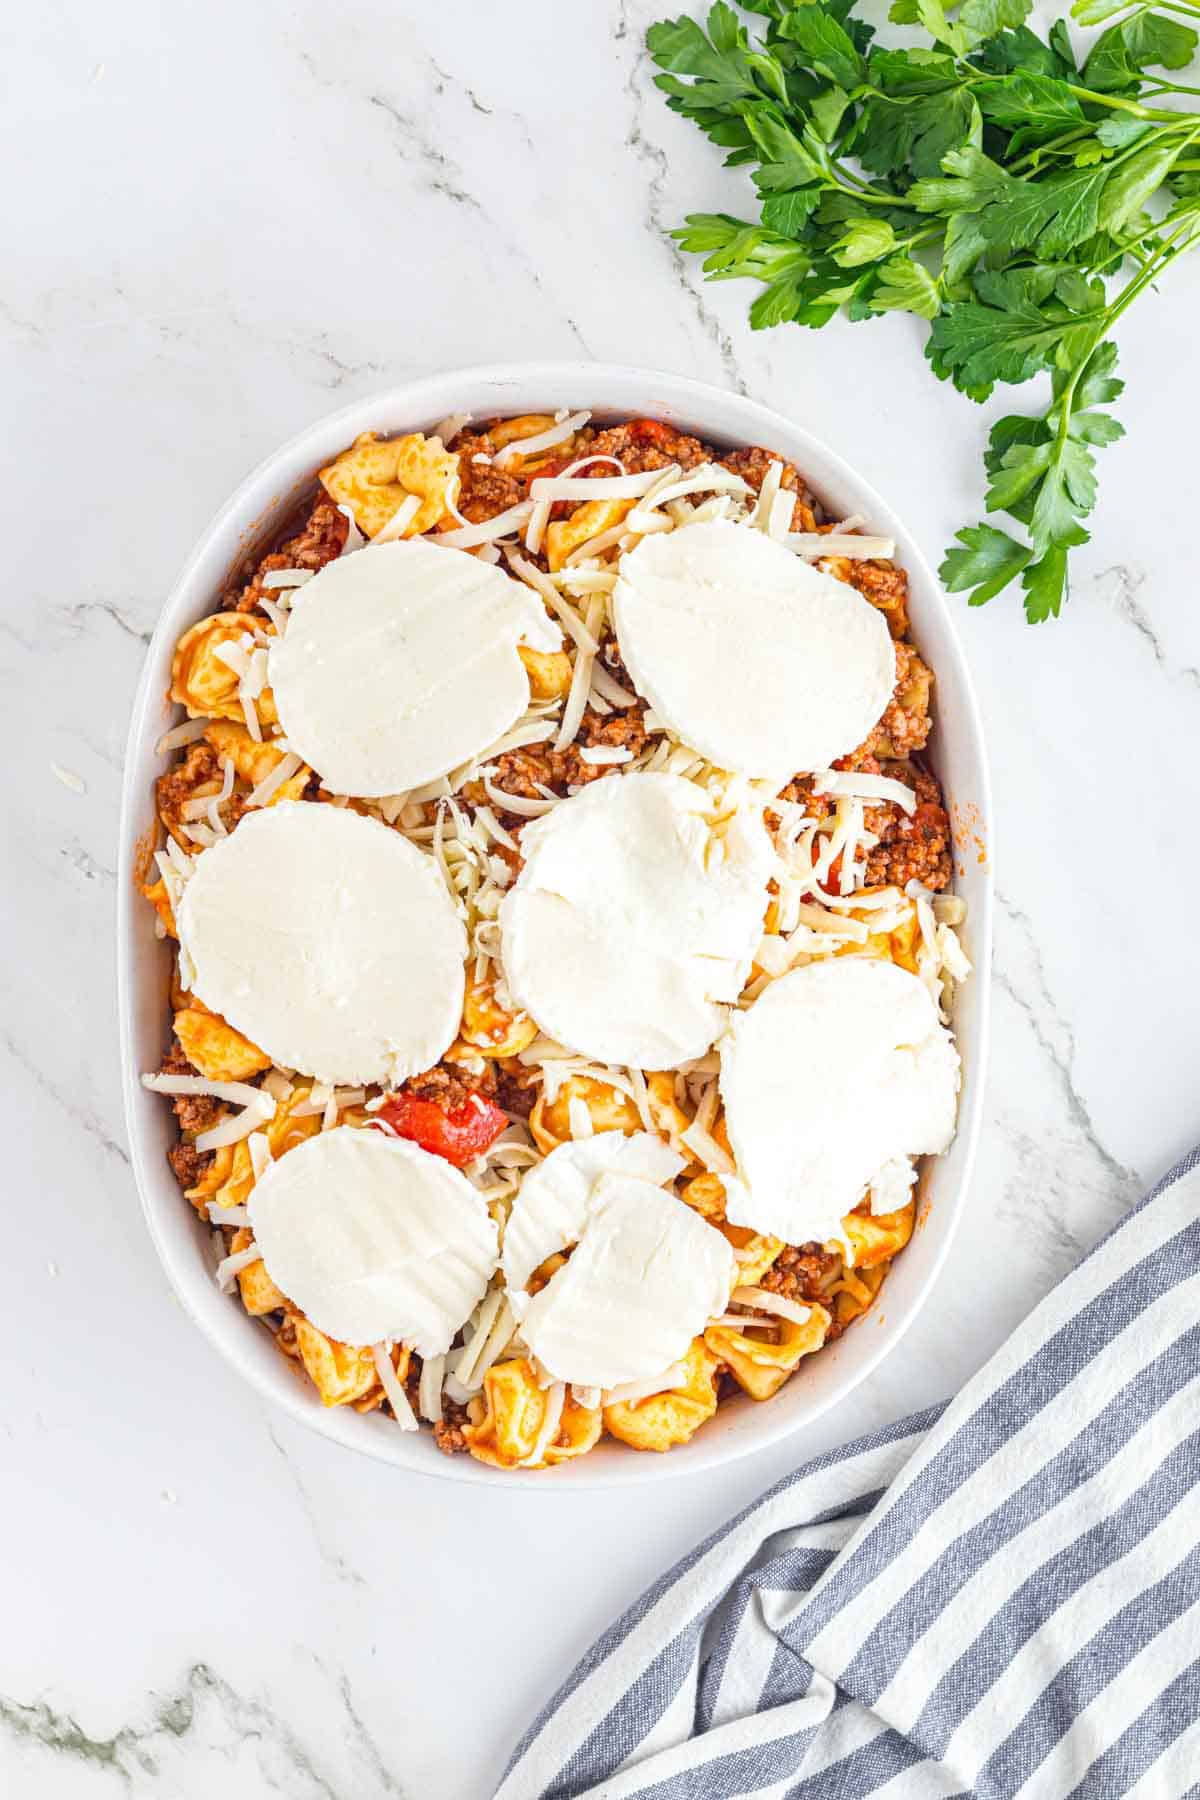 Tortellini casserole in a baking dish layered with cheese.